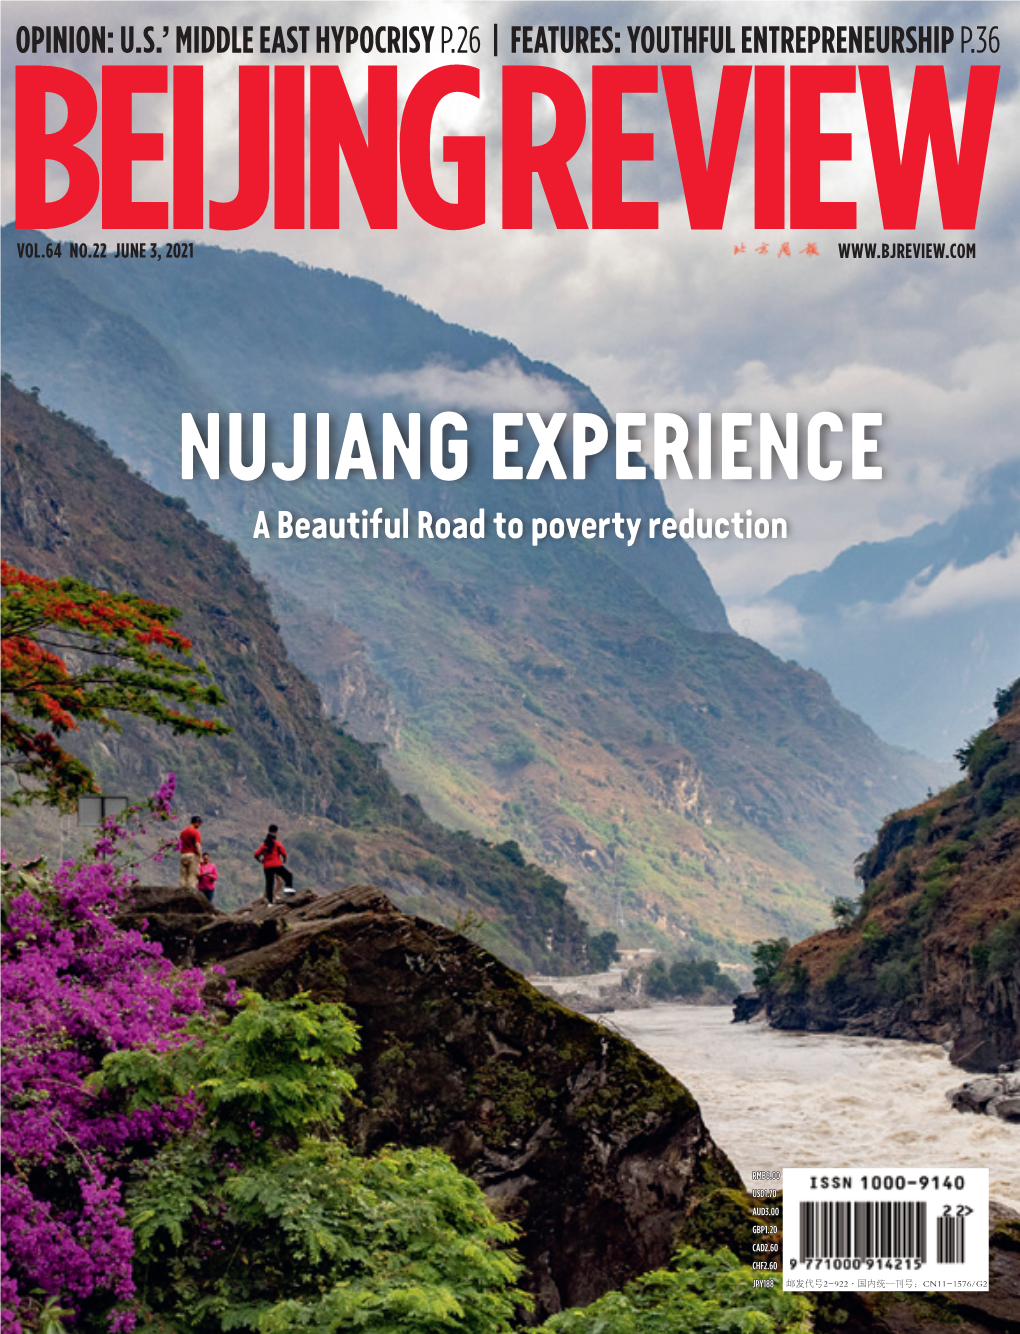 NUJIANG EXPERIENCE a Beautiful Road to Poverty Reduction